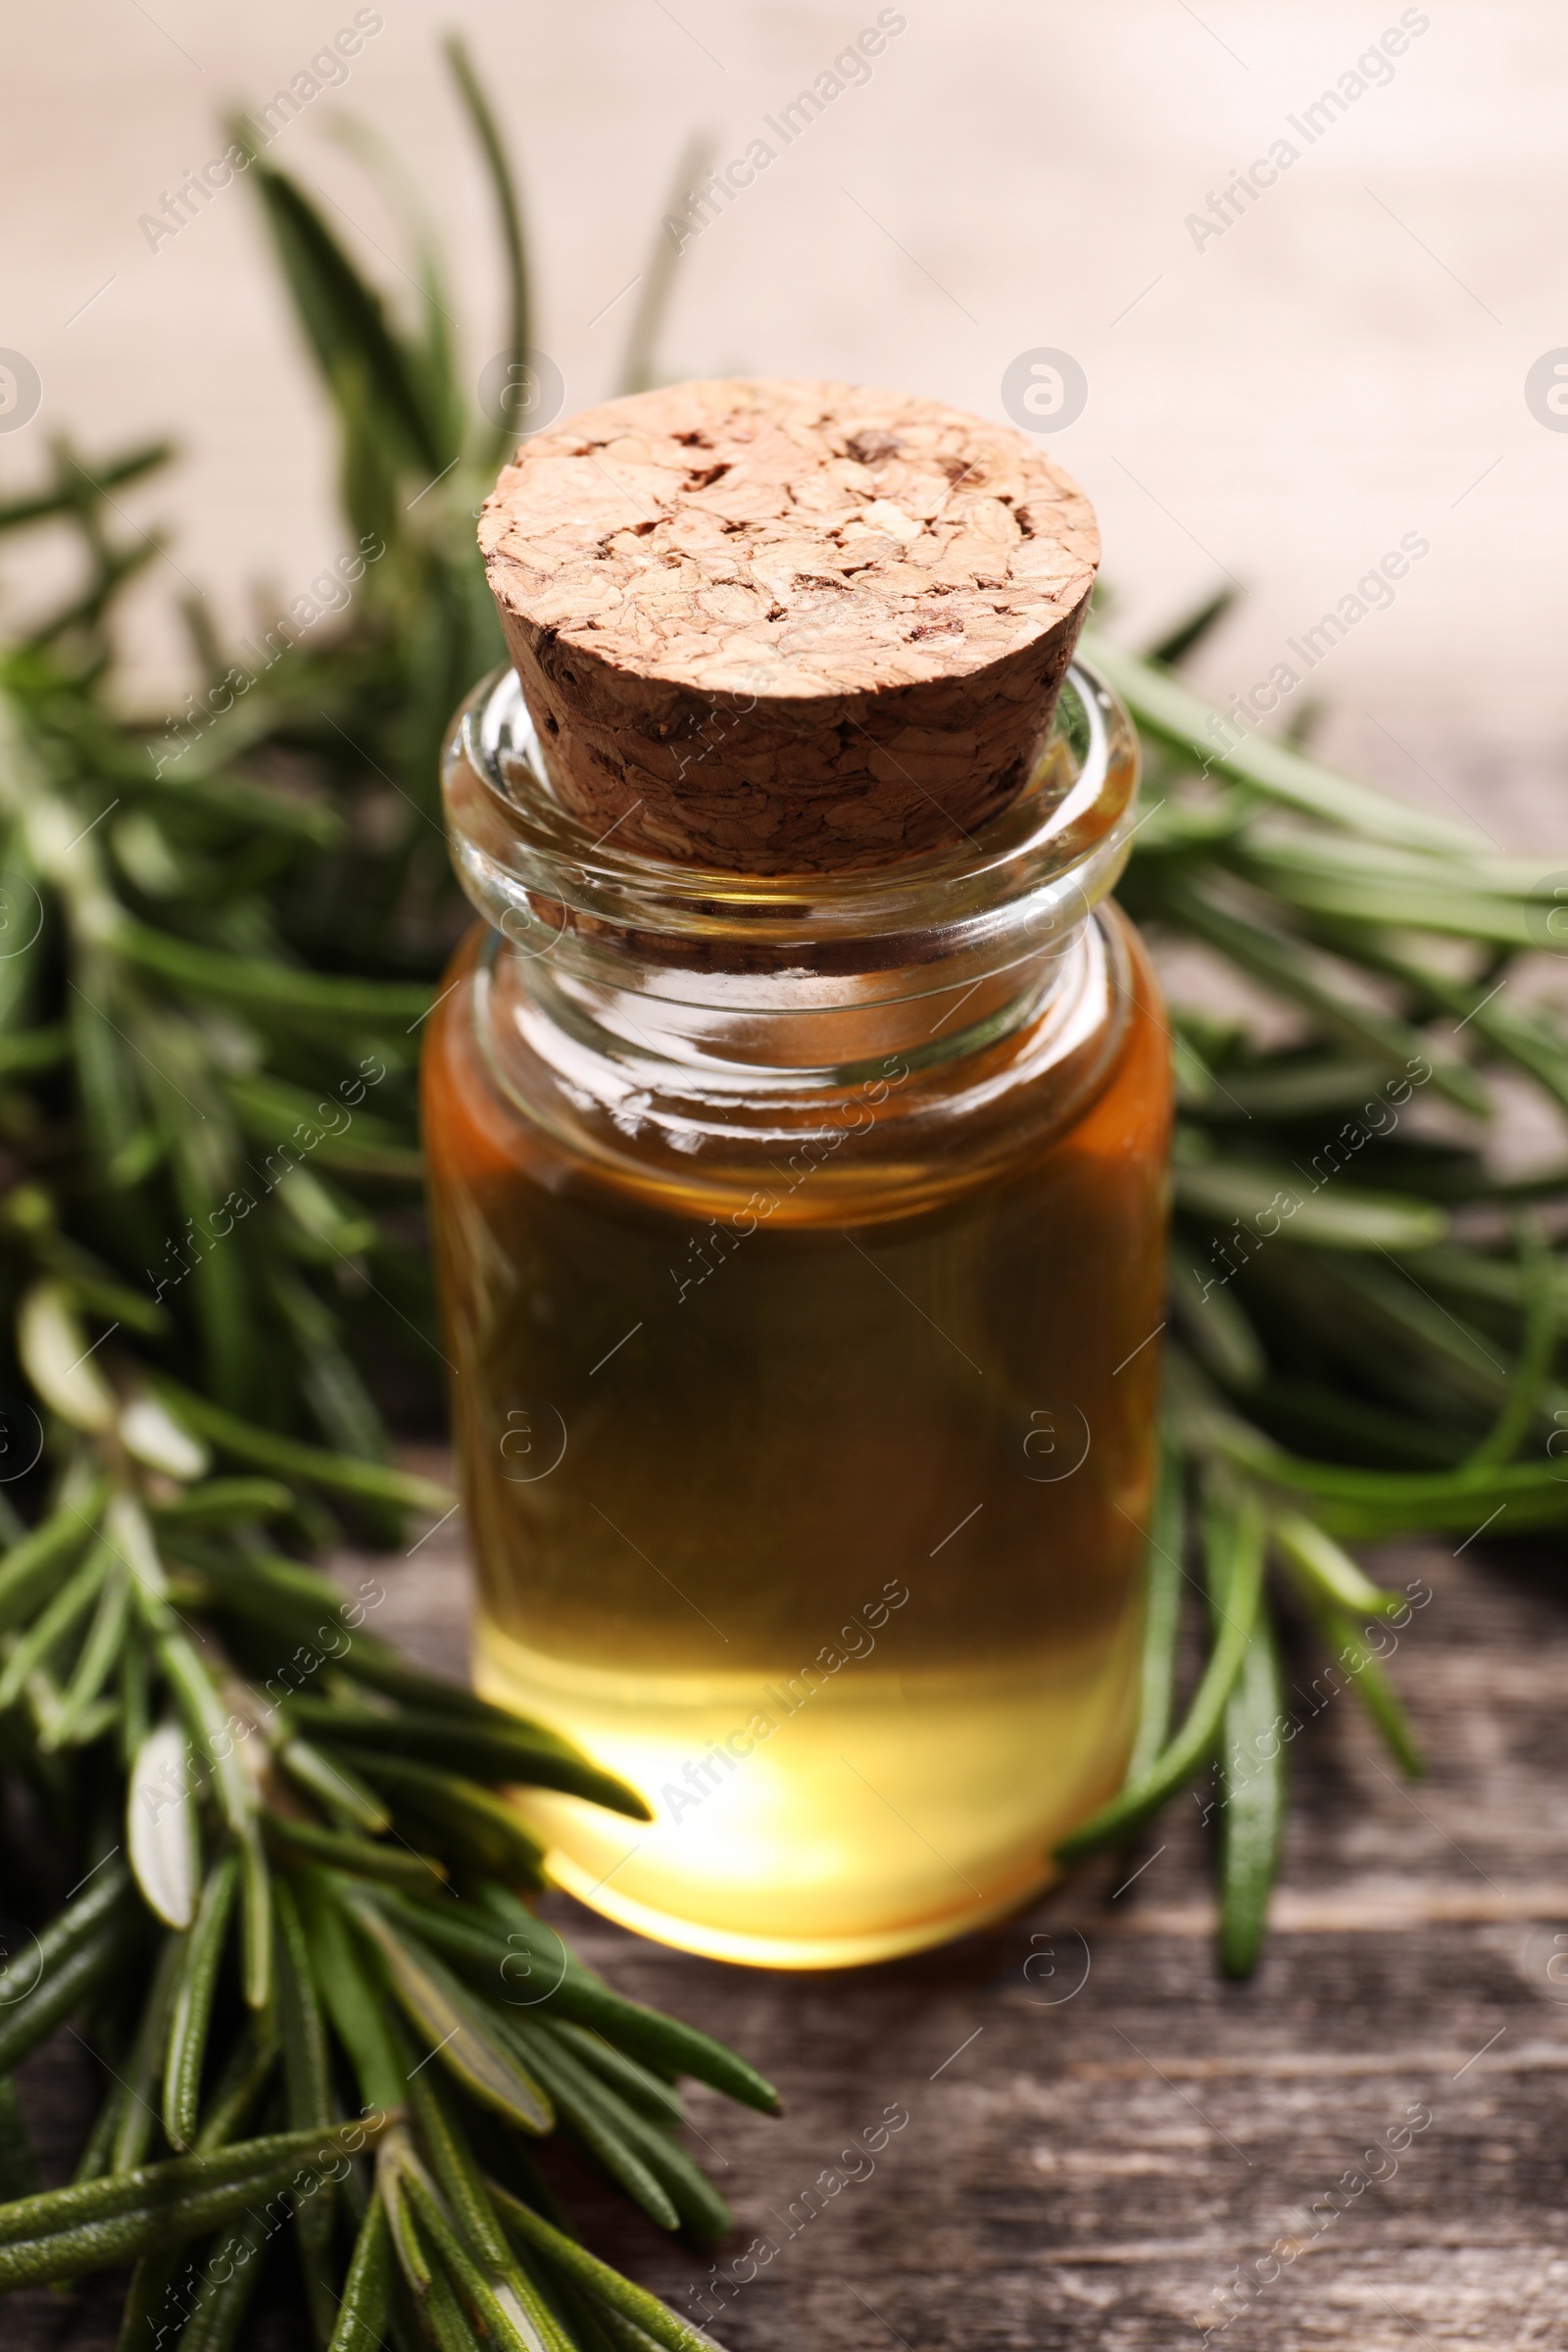 Photo of Bottle of essential oil and fresh rosemary on wooden table, closeup